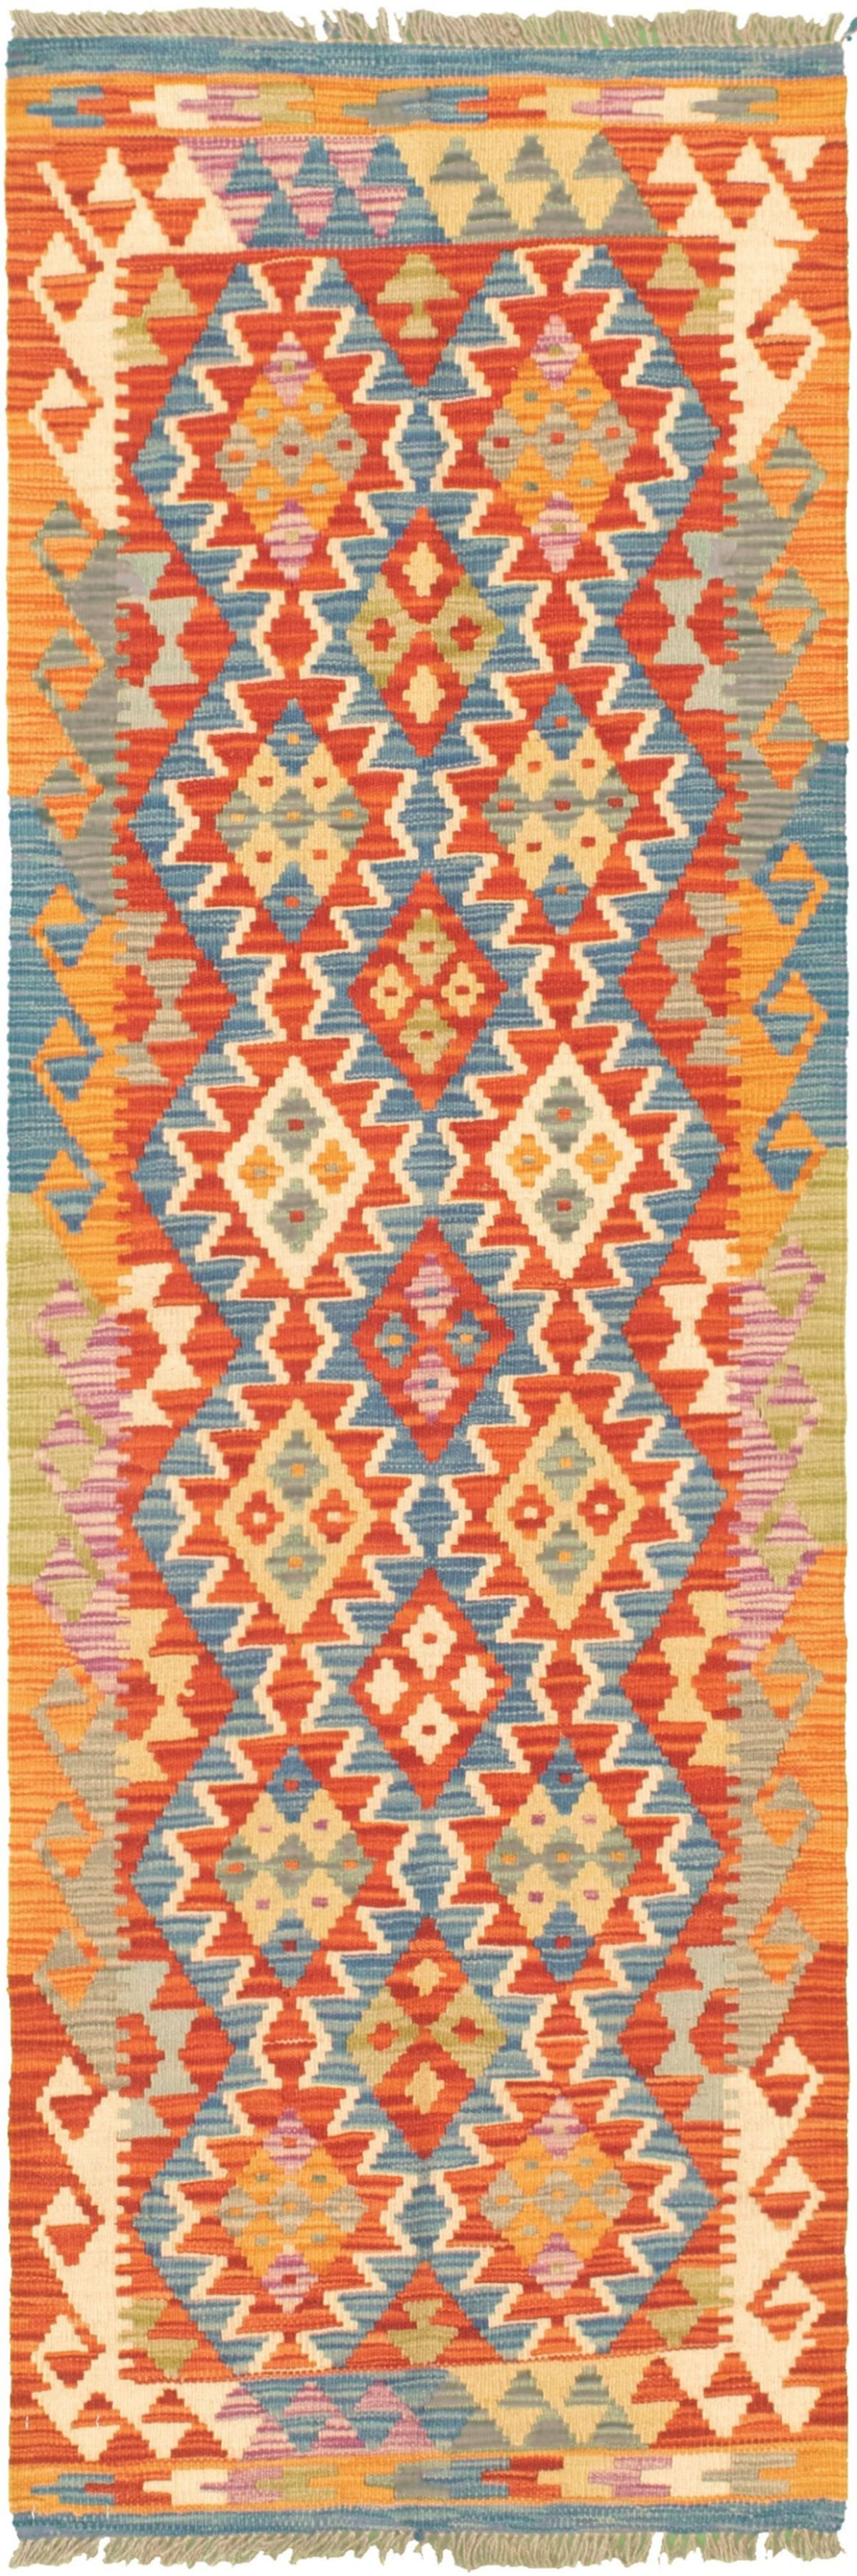 Hand woven Bold and Colorful  Dark Copper Wool Kilim 2'0" x 6'7" Size: 2'0" x 6'7"  